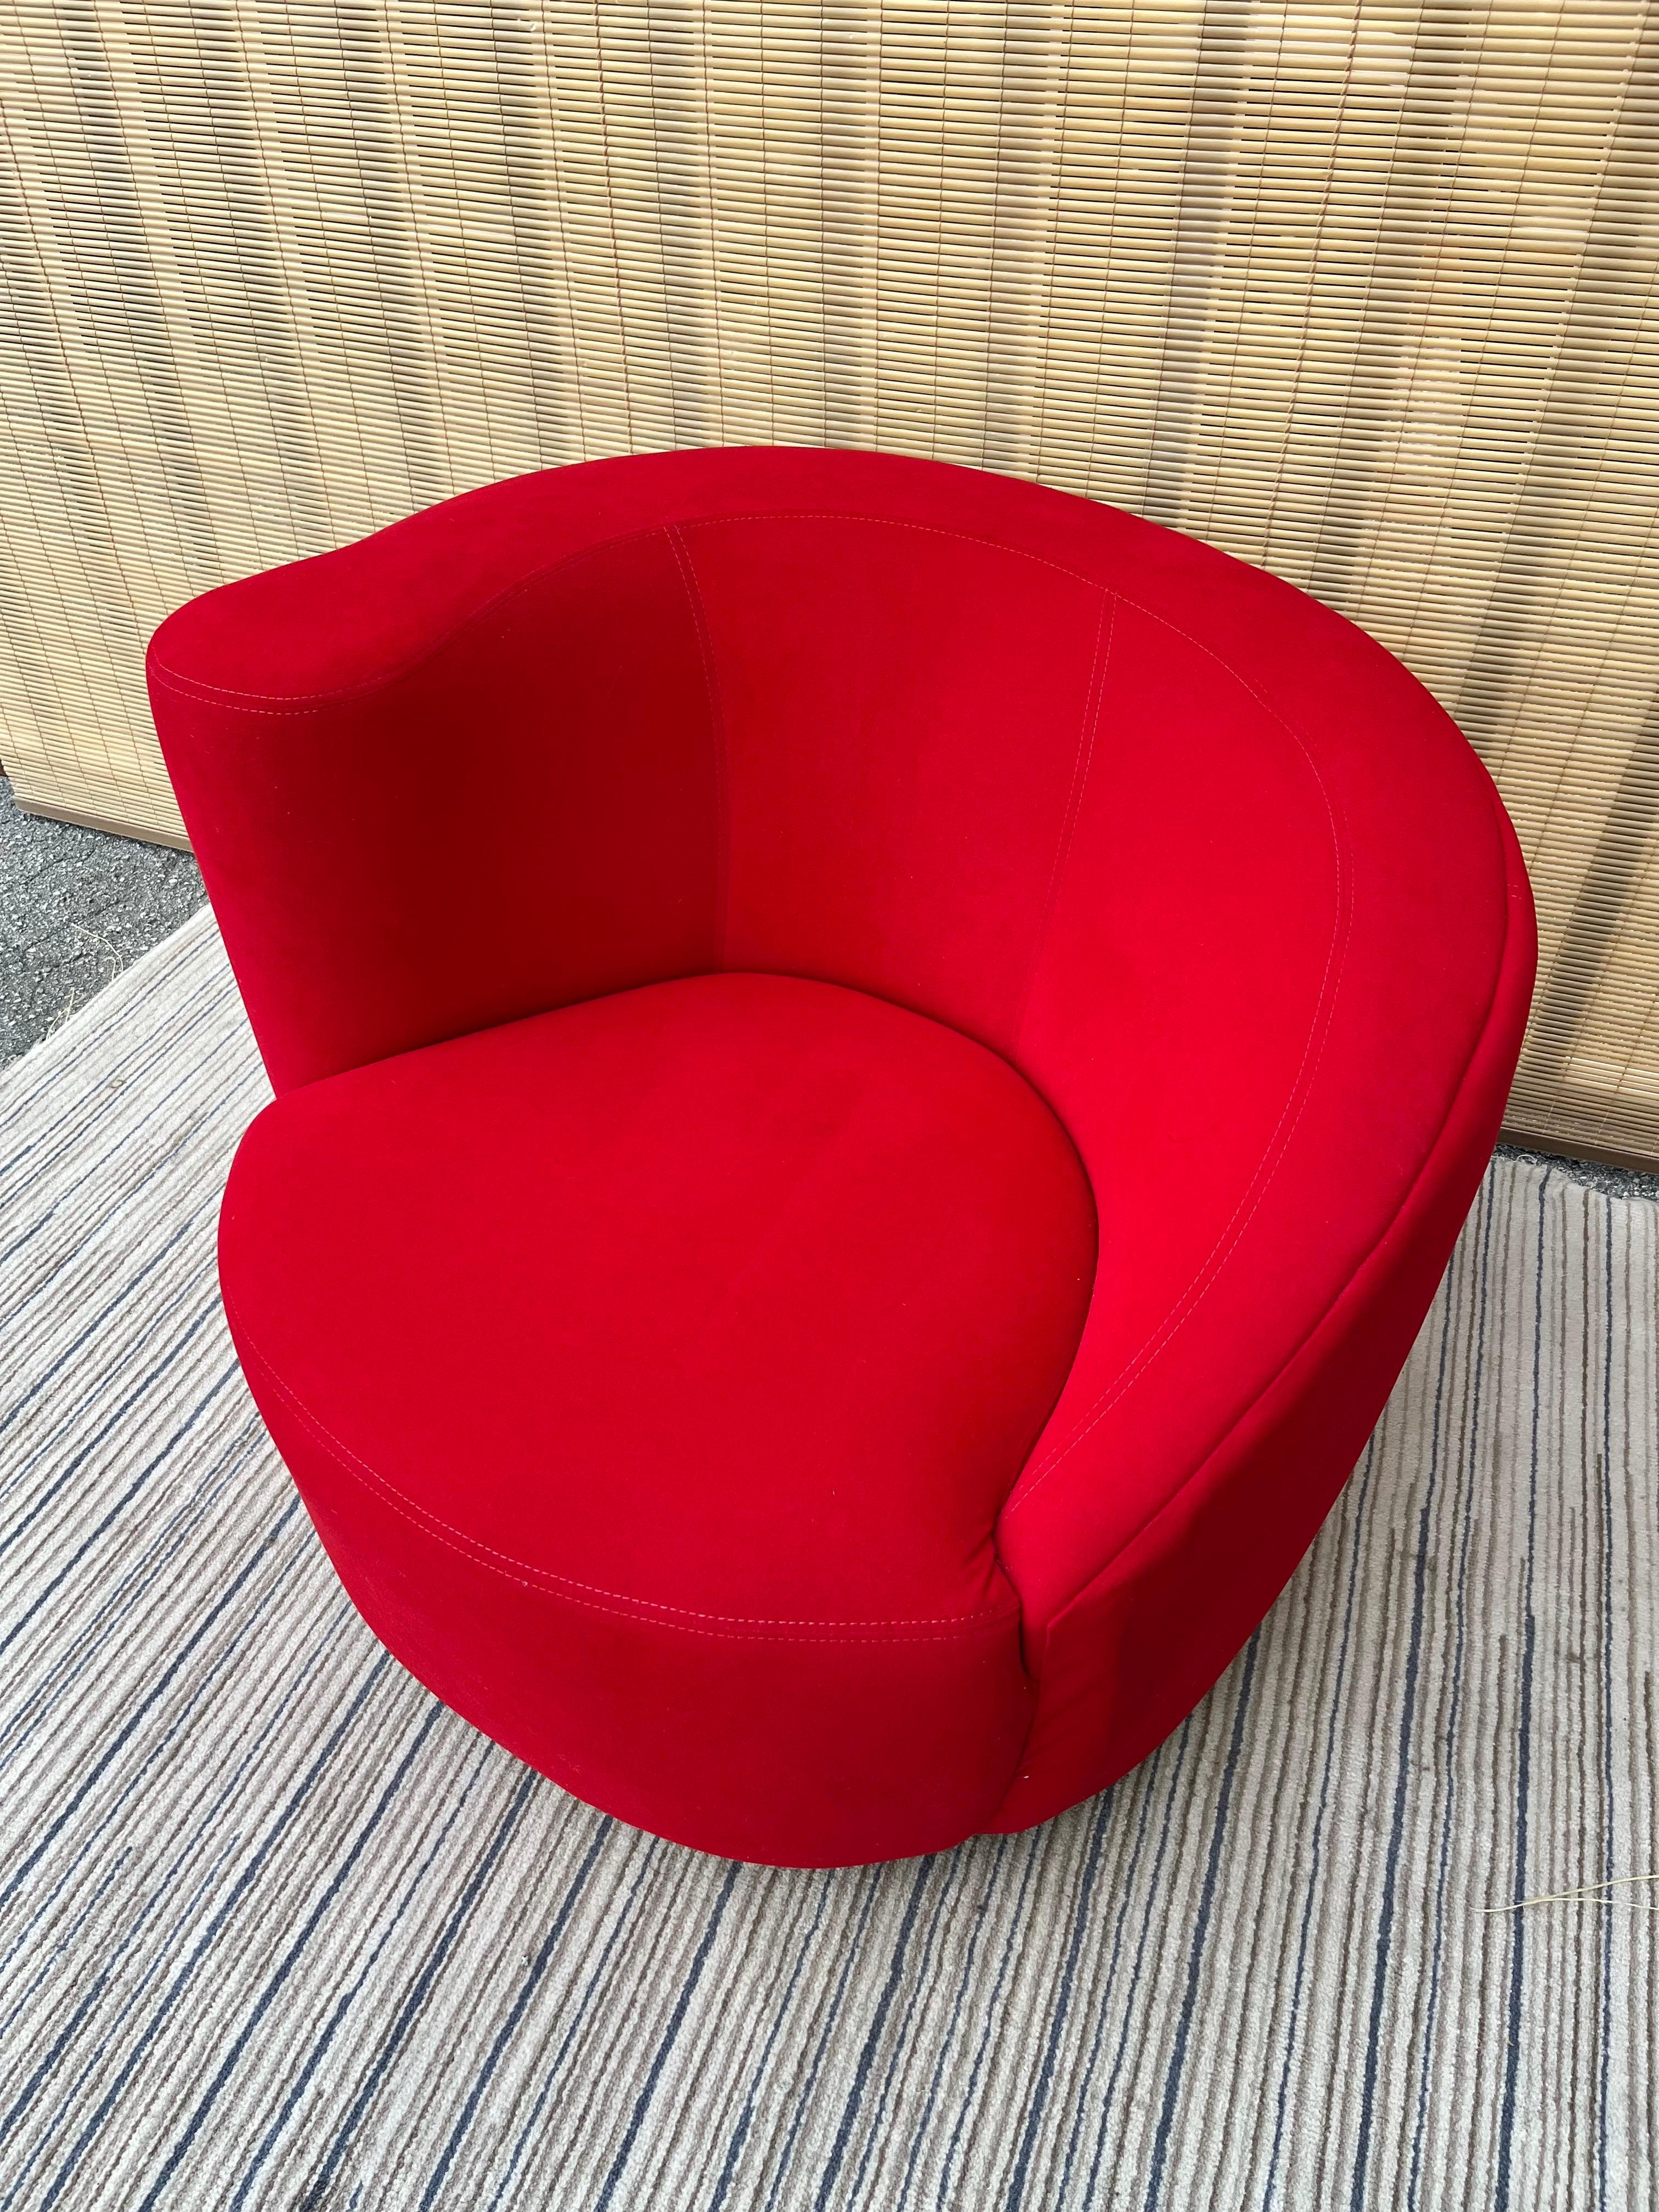 Post-Modern Late 20th Century Upholstered Swivel Chair For Sale